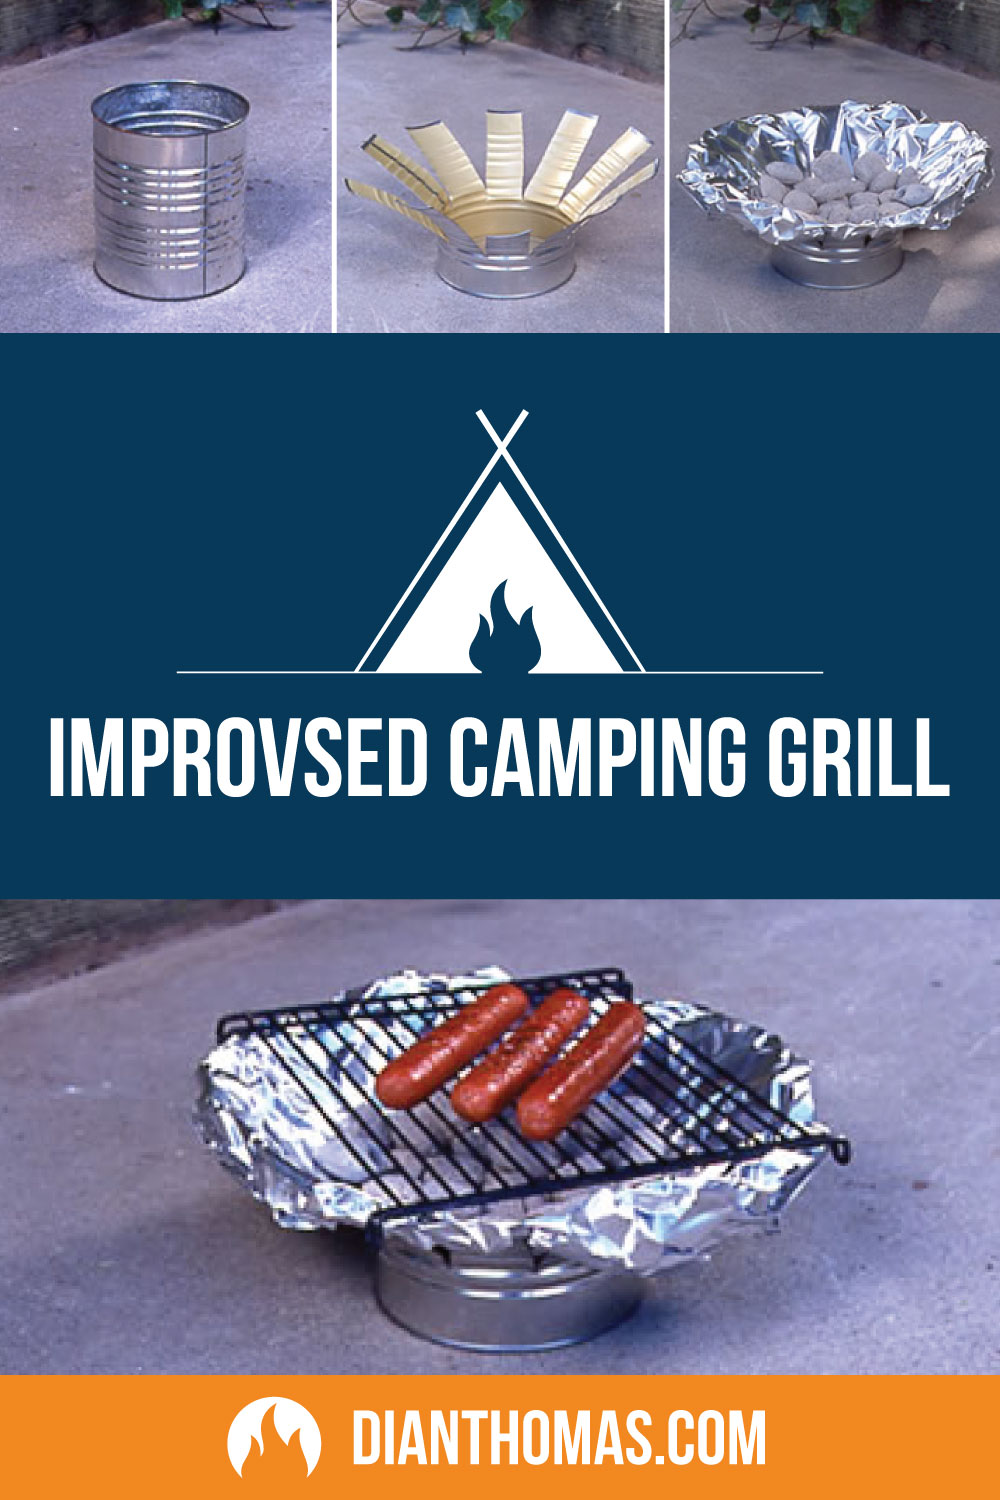 If you do not have a grill, here are some fun creative ways to use your ingenuity to make one.